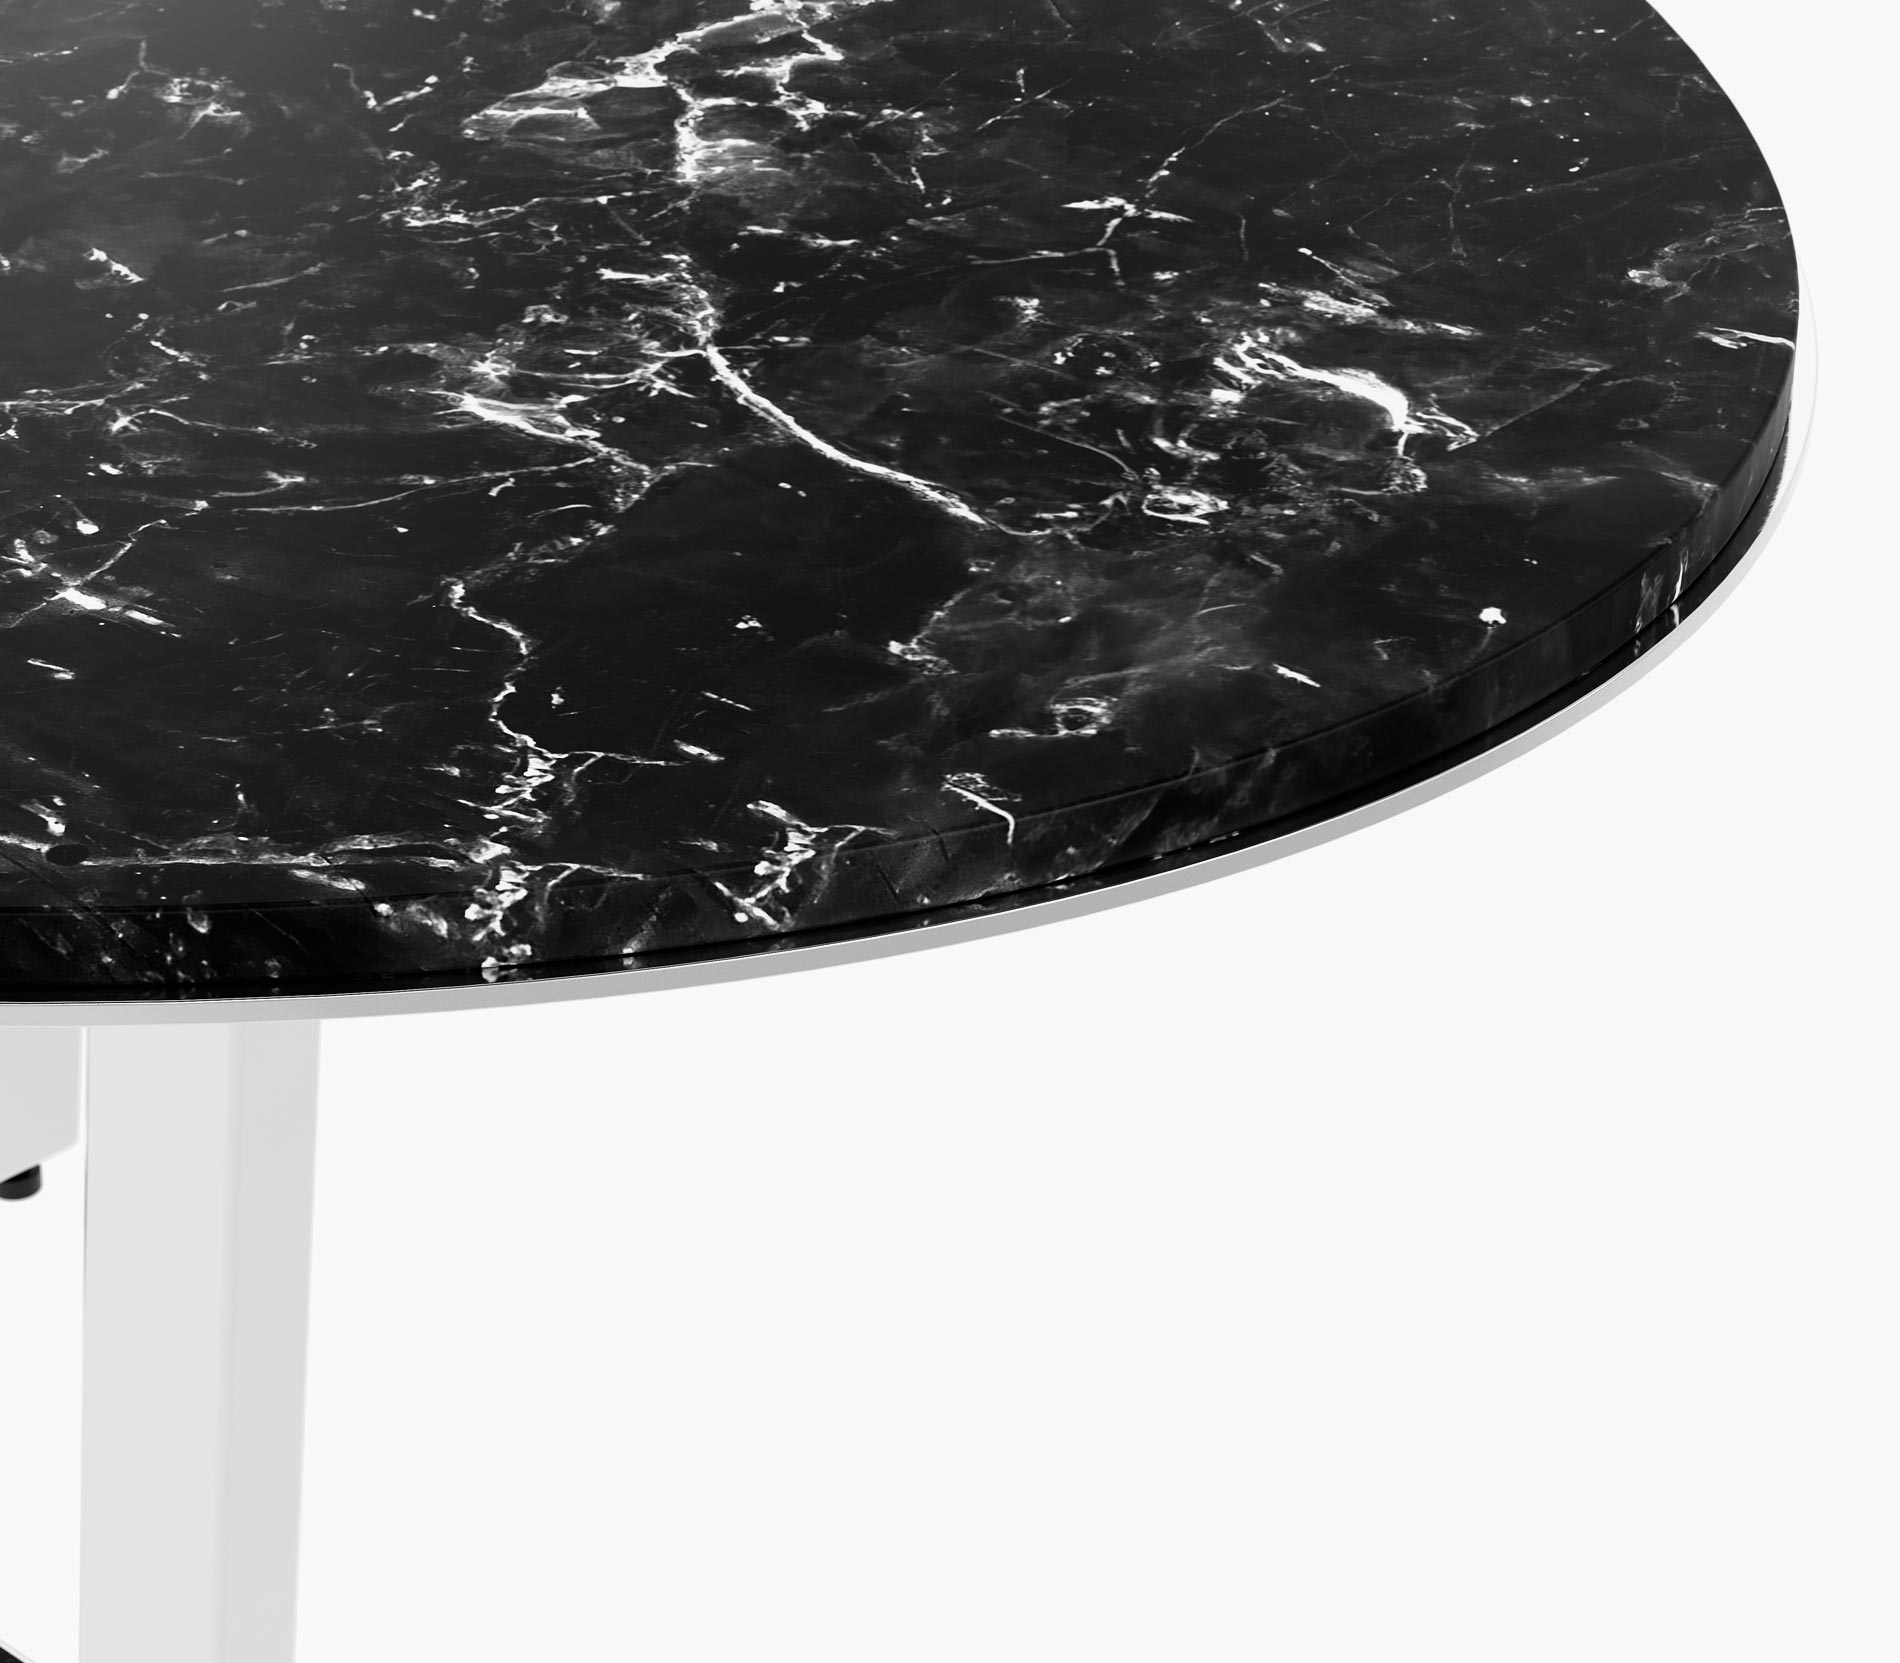 Edge detail on an Elliptical-shaped Highline Meeting Table in nero marquina honed marble with a polished chrome edge and base.